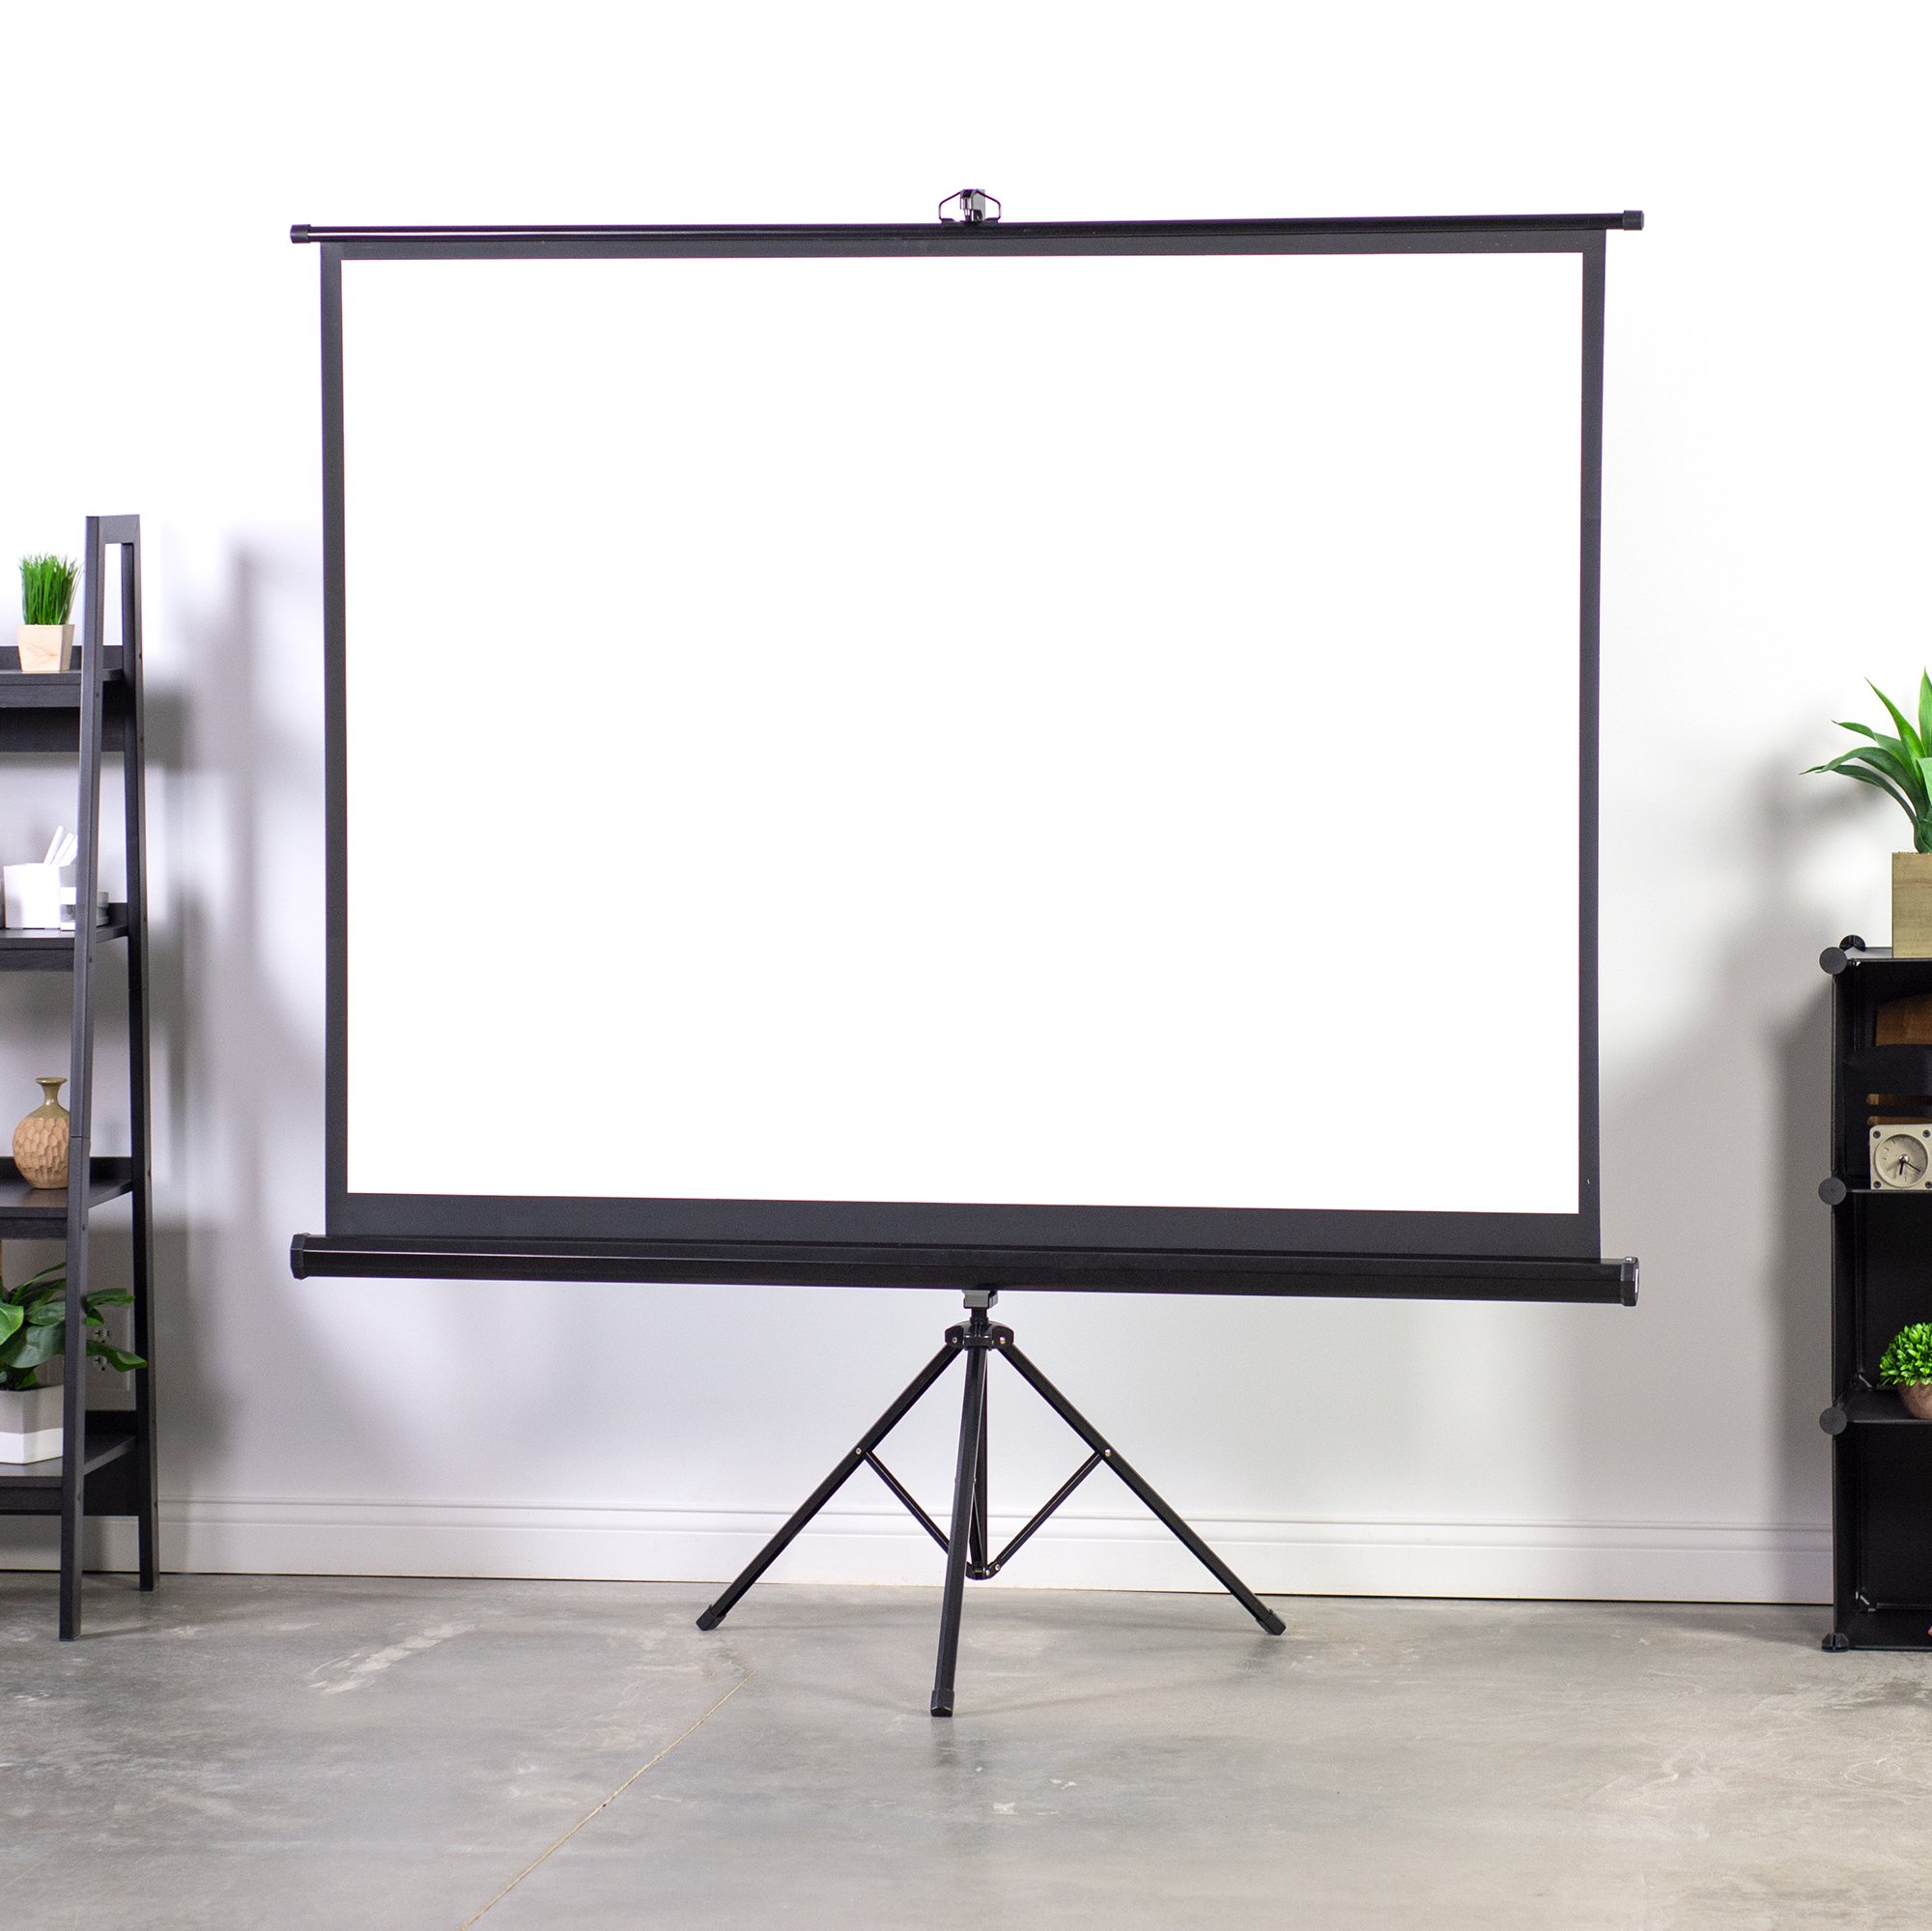 Portable 100" Projector 16:9 Projection Screen Tripod Pull-up Matte White TS 